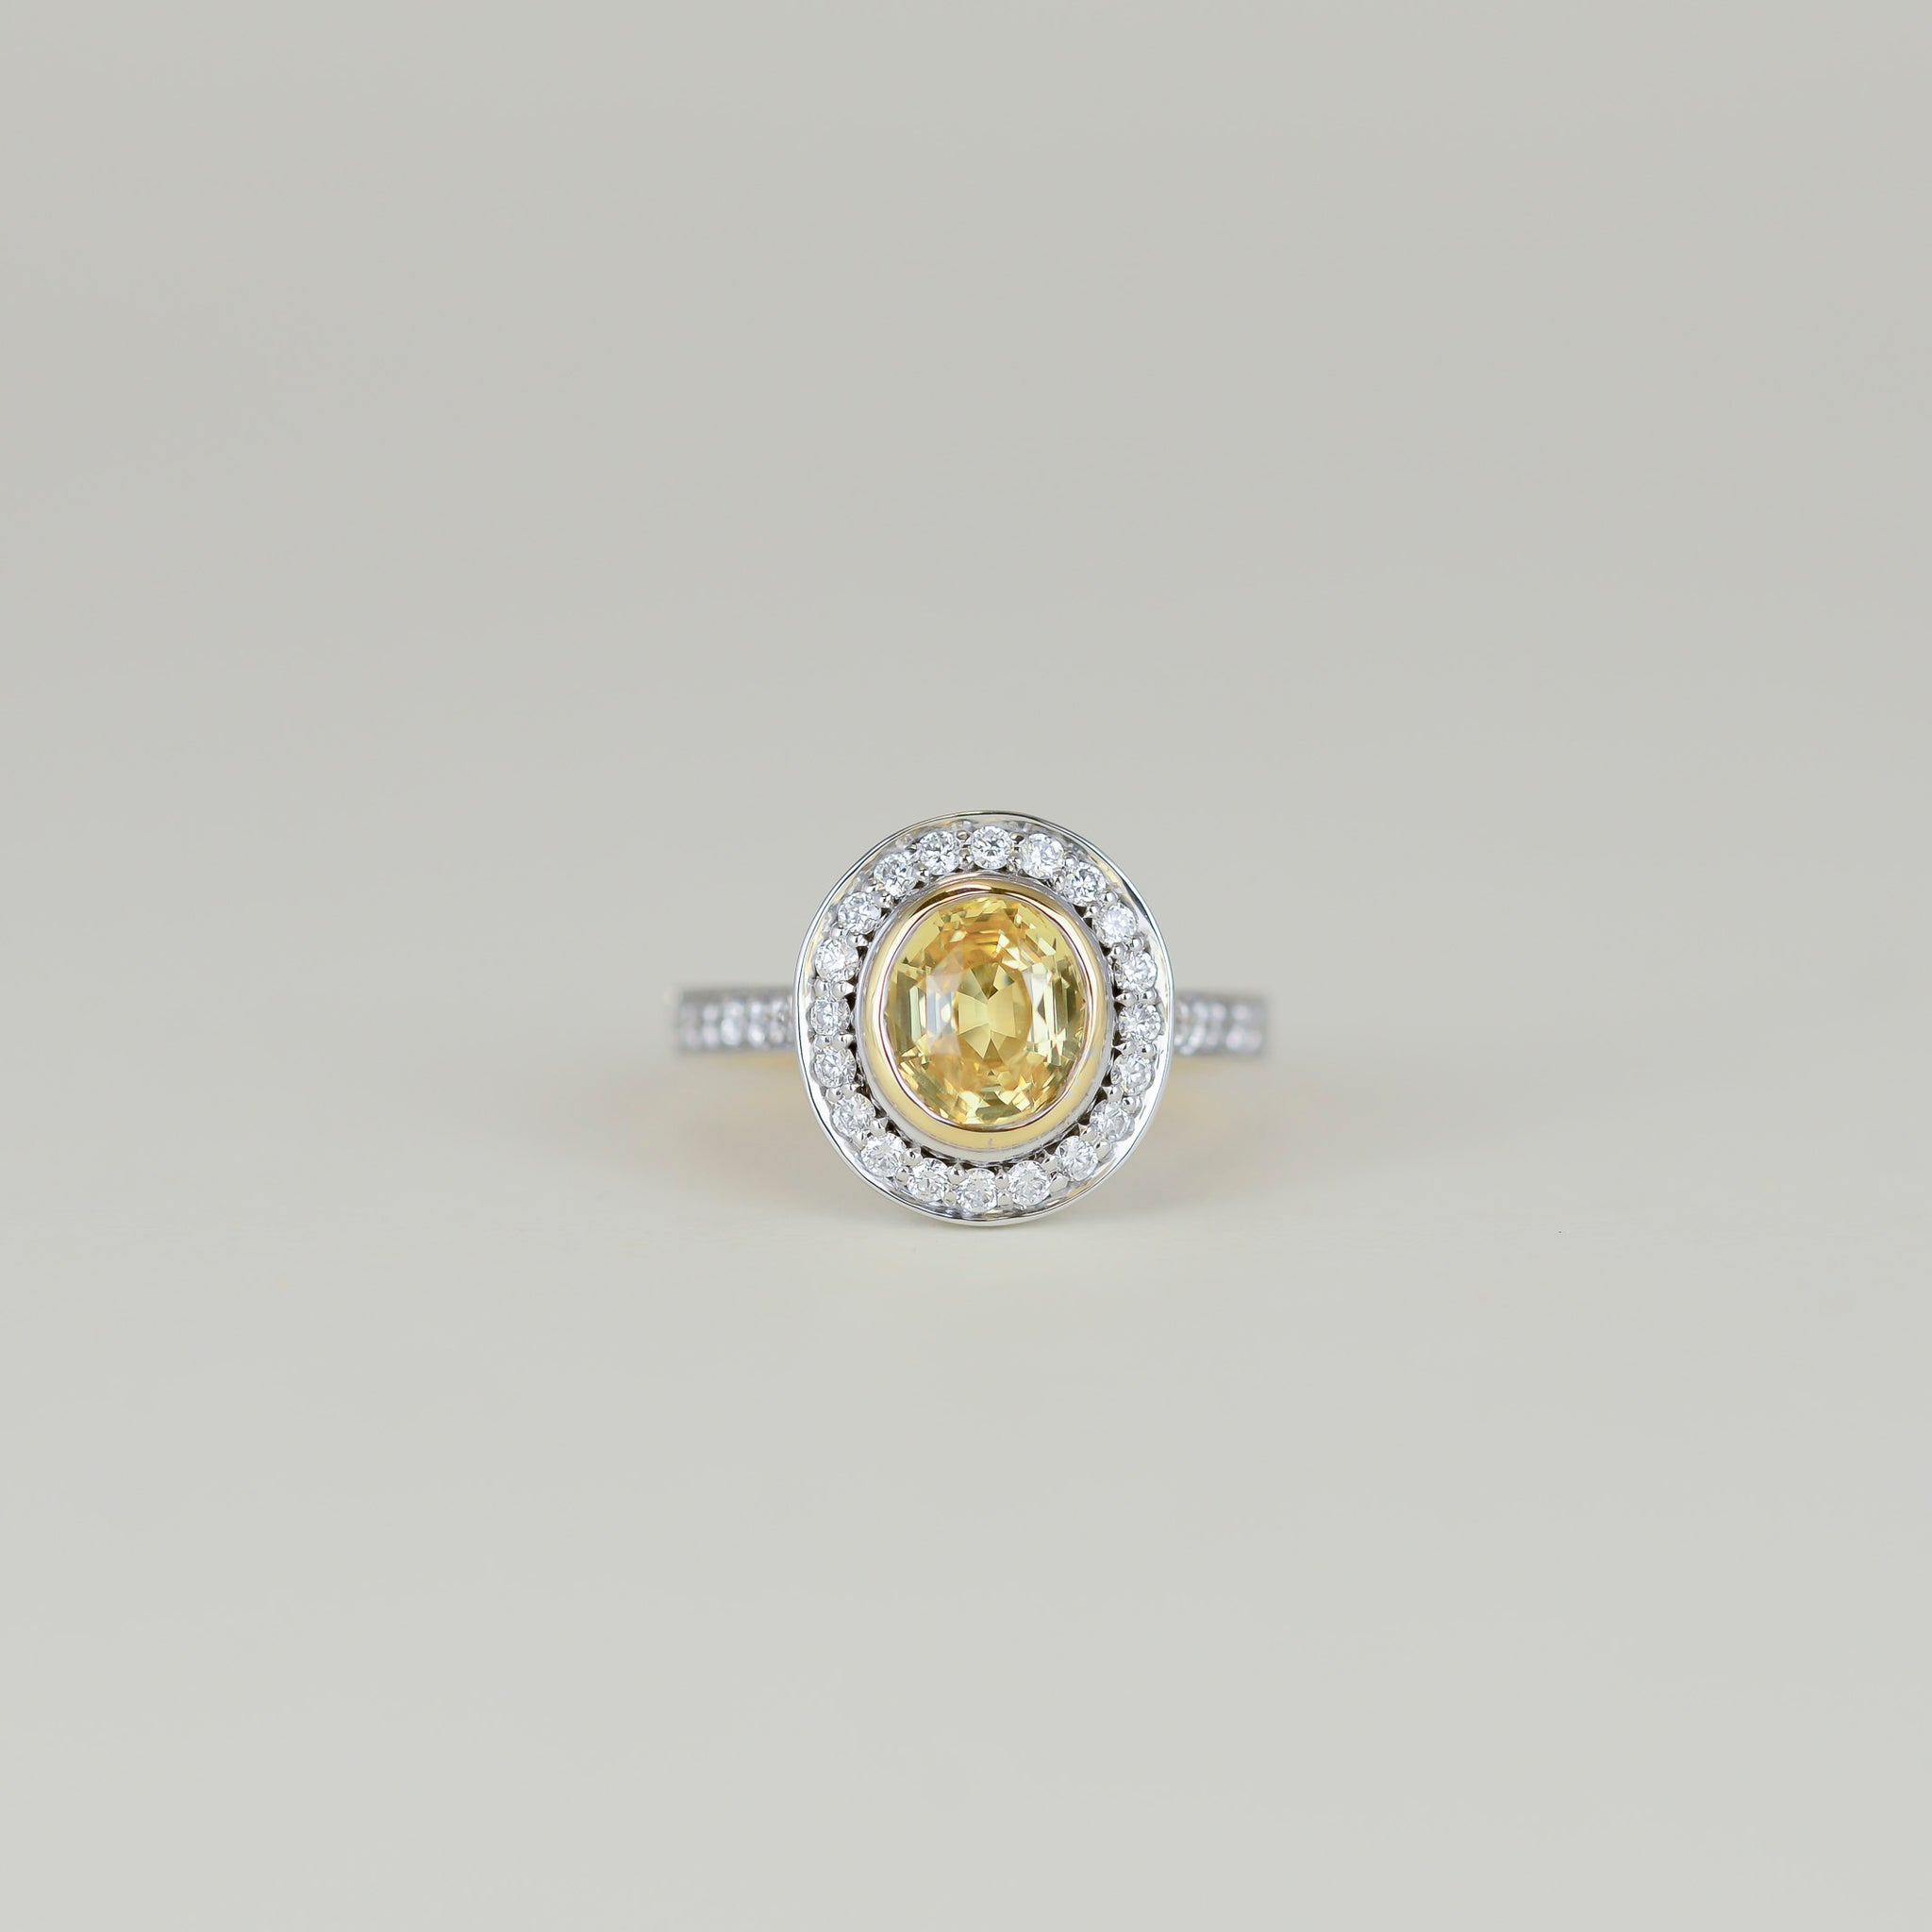 18ct Yellow and White Gold 2.11ct Yellow Sapphire and Diamond Cluster Ring